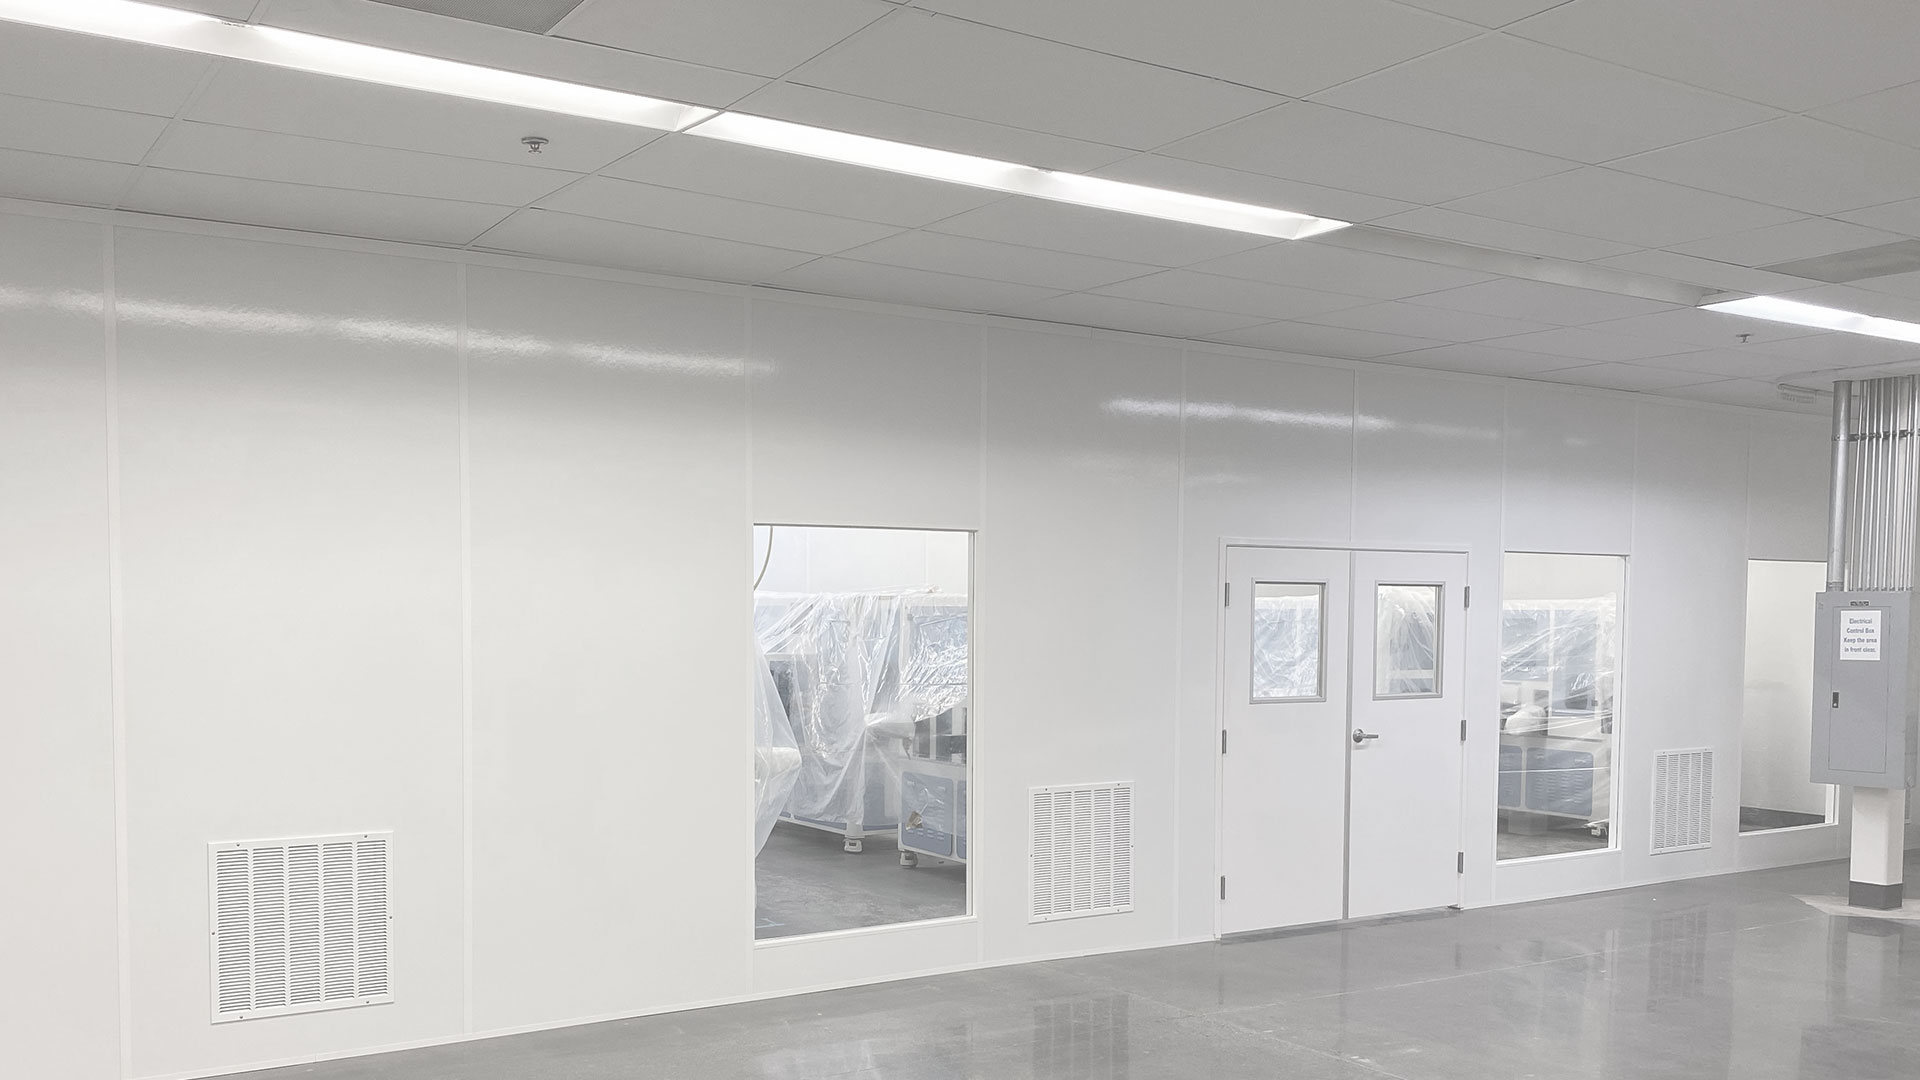 Modular Cleanroom by allied cleanrooms Modular Cleanroom by allied cleanrooms Clean room by Allied Cleanrooms Supplier - USP 797, and ISO 4, ISO 5, ISO 6, ISO 7, and IS0 8, cGMP cleanroom manufacturing, soft wall cleanrooms FED-STD-209E and ISO 14644-1, control contamination